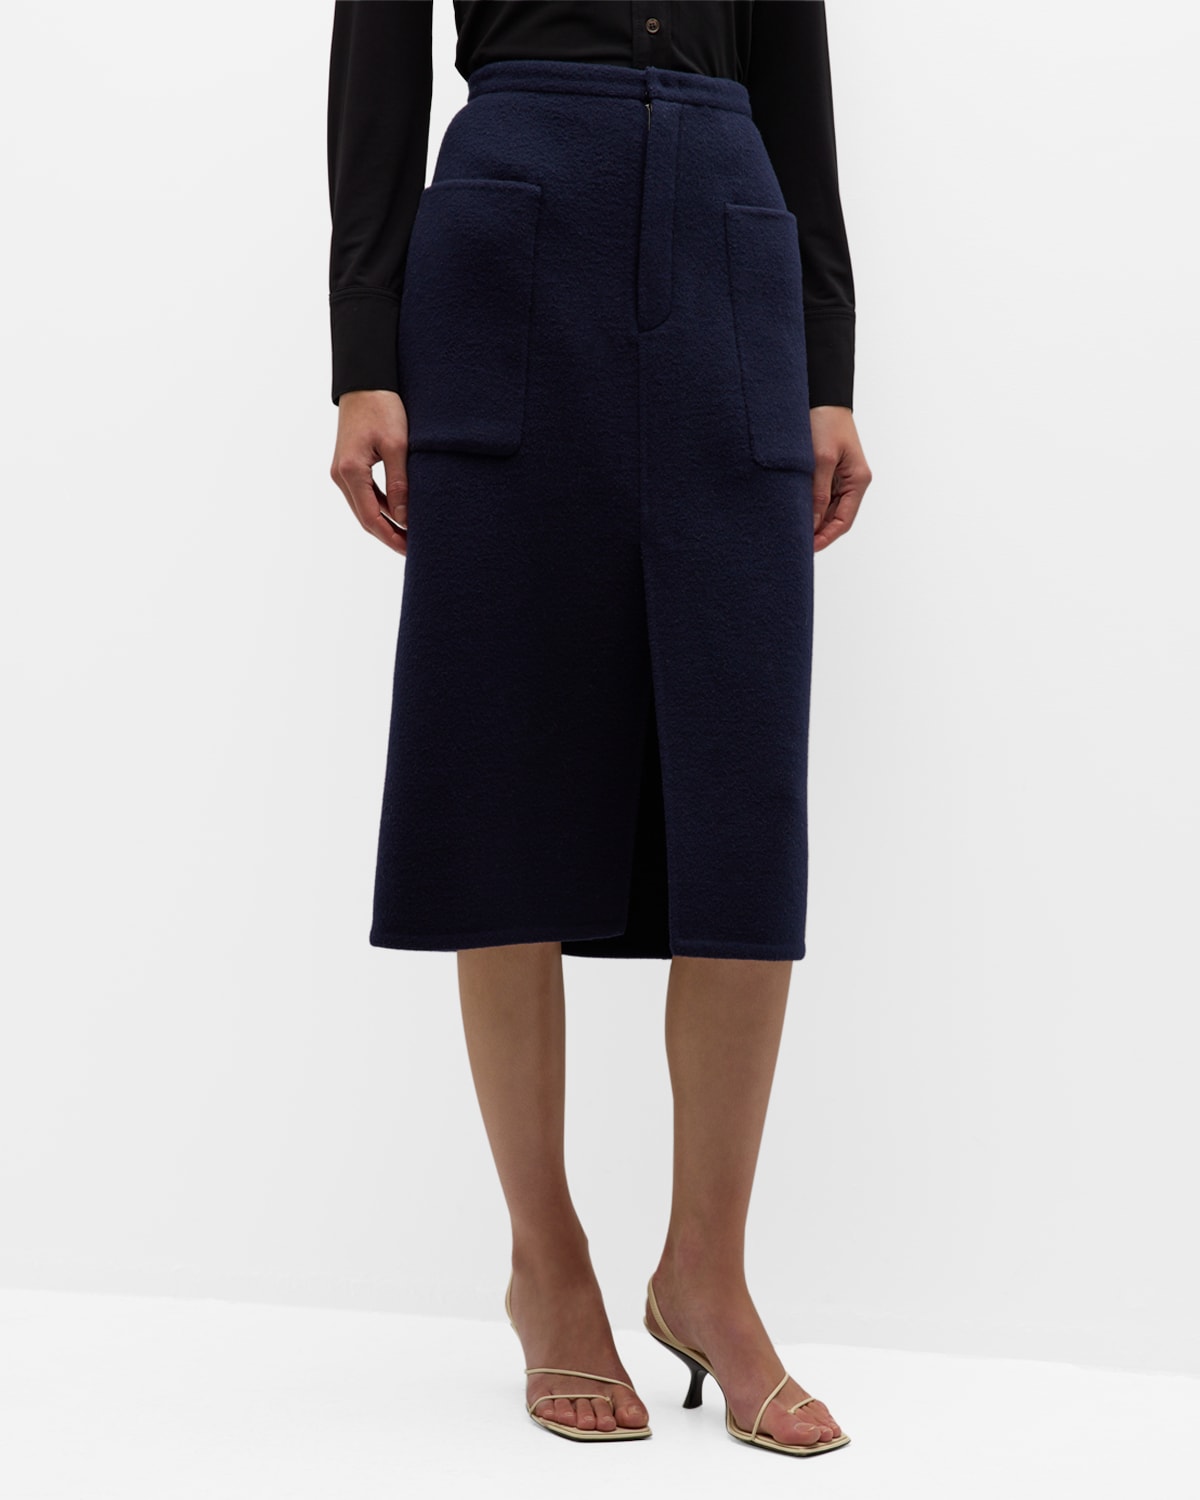 Brushed Recycled Wool-Blend Pencil Skirt